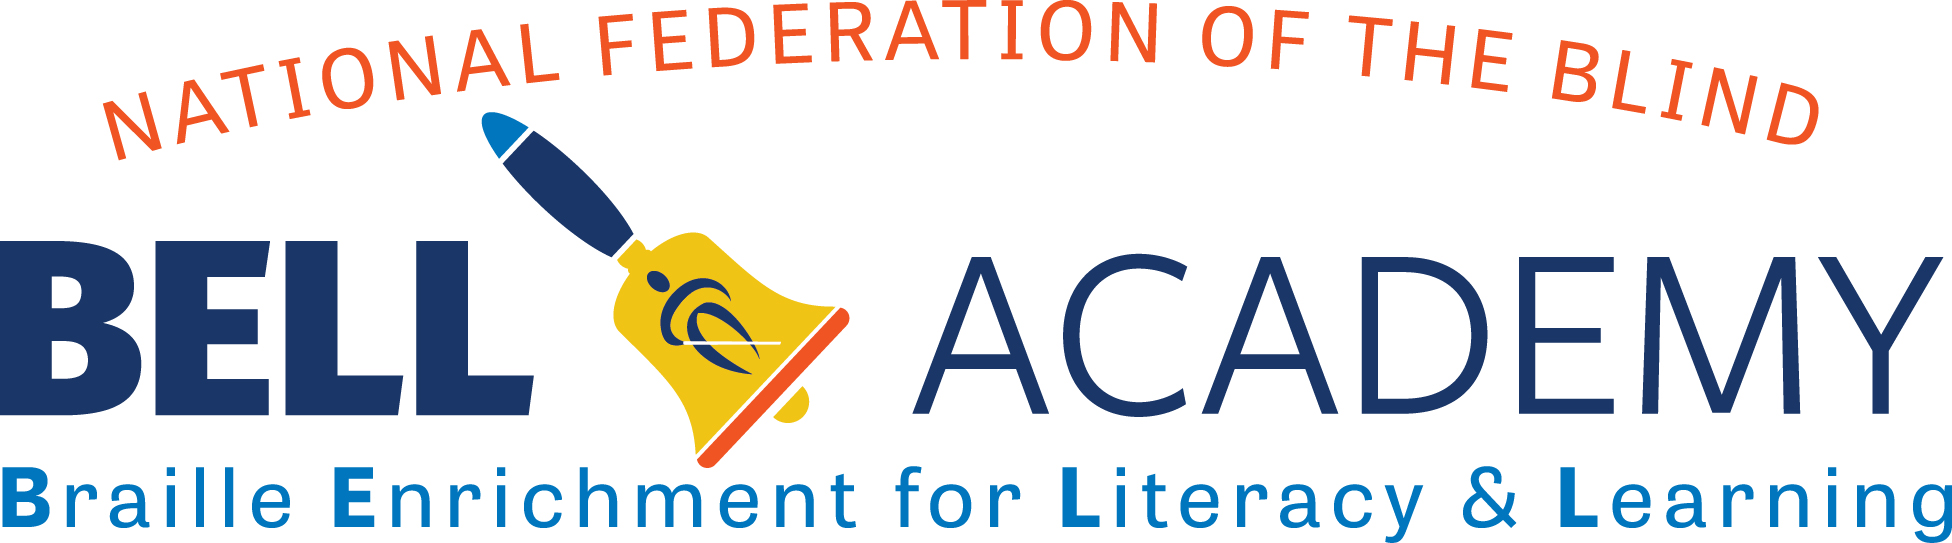 NFB BELL (Braille Enrichment for Literacy & Learning) Academy logo